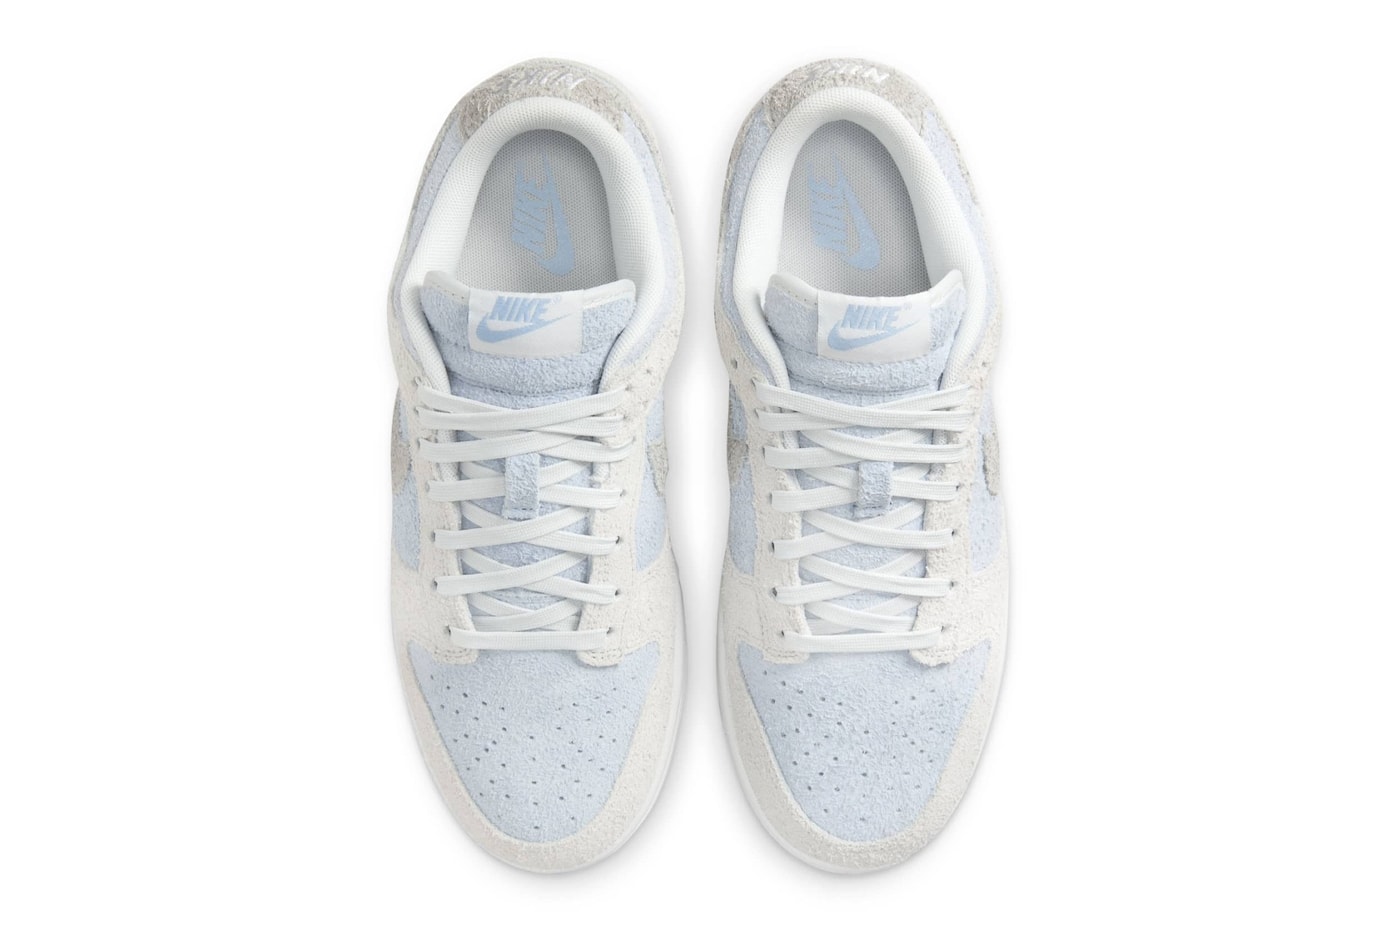 Official Look At the Nike Dunk Low "Photon Dust/Light Armory Blue" suede fuzzy textured swoosh low top sneaker FZ3779-025 Photon Dust/Light Smoke Grey-Light Armory Blue